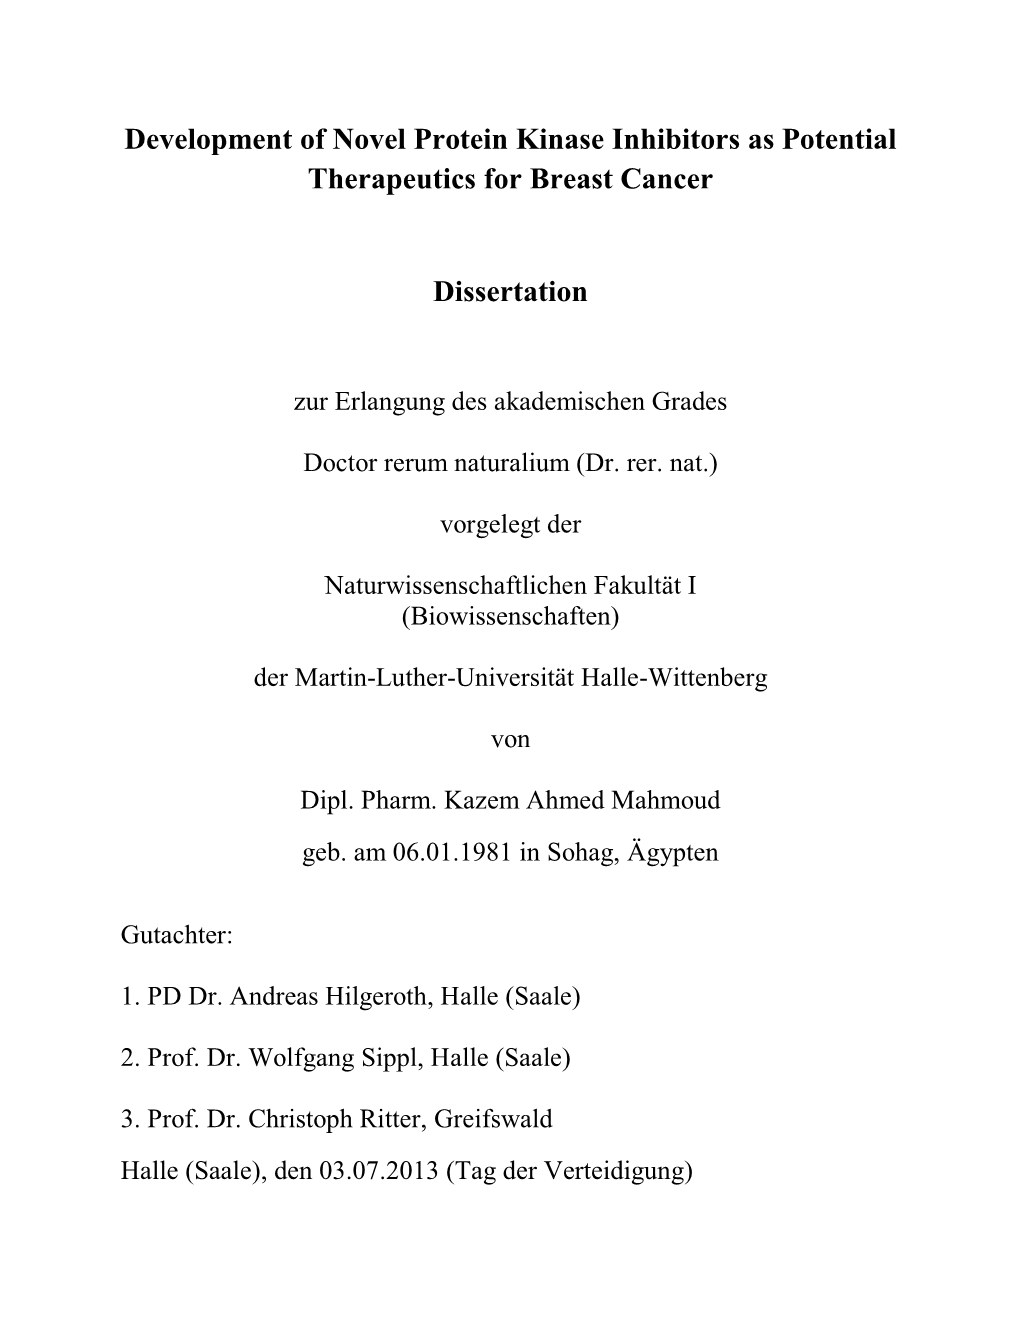 Development of Novel Protein Kinase Inhibitors As Potential Therapeutics for Breast Cancer Dissertation